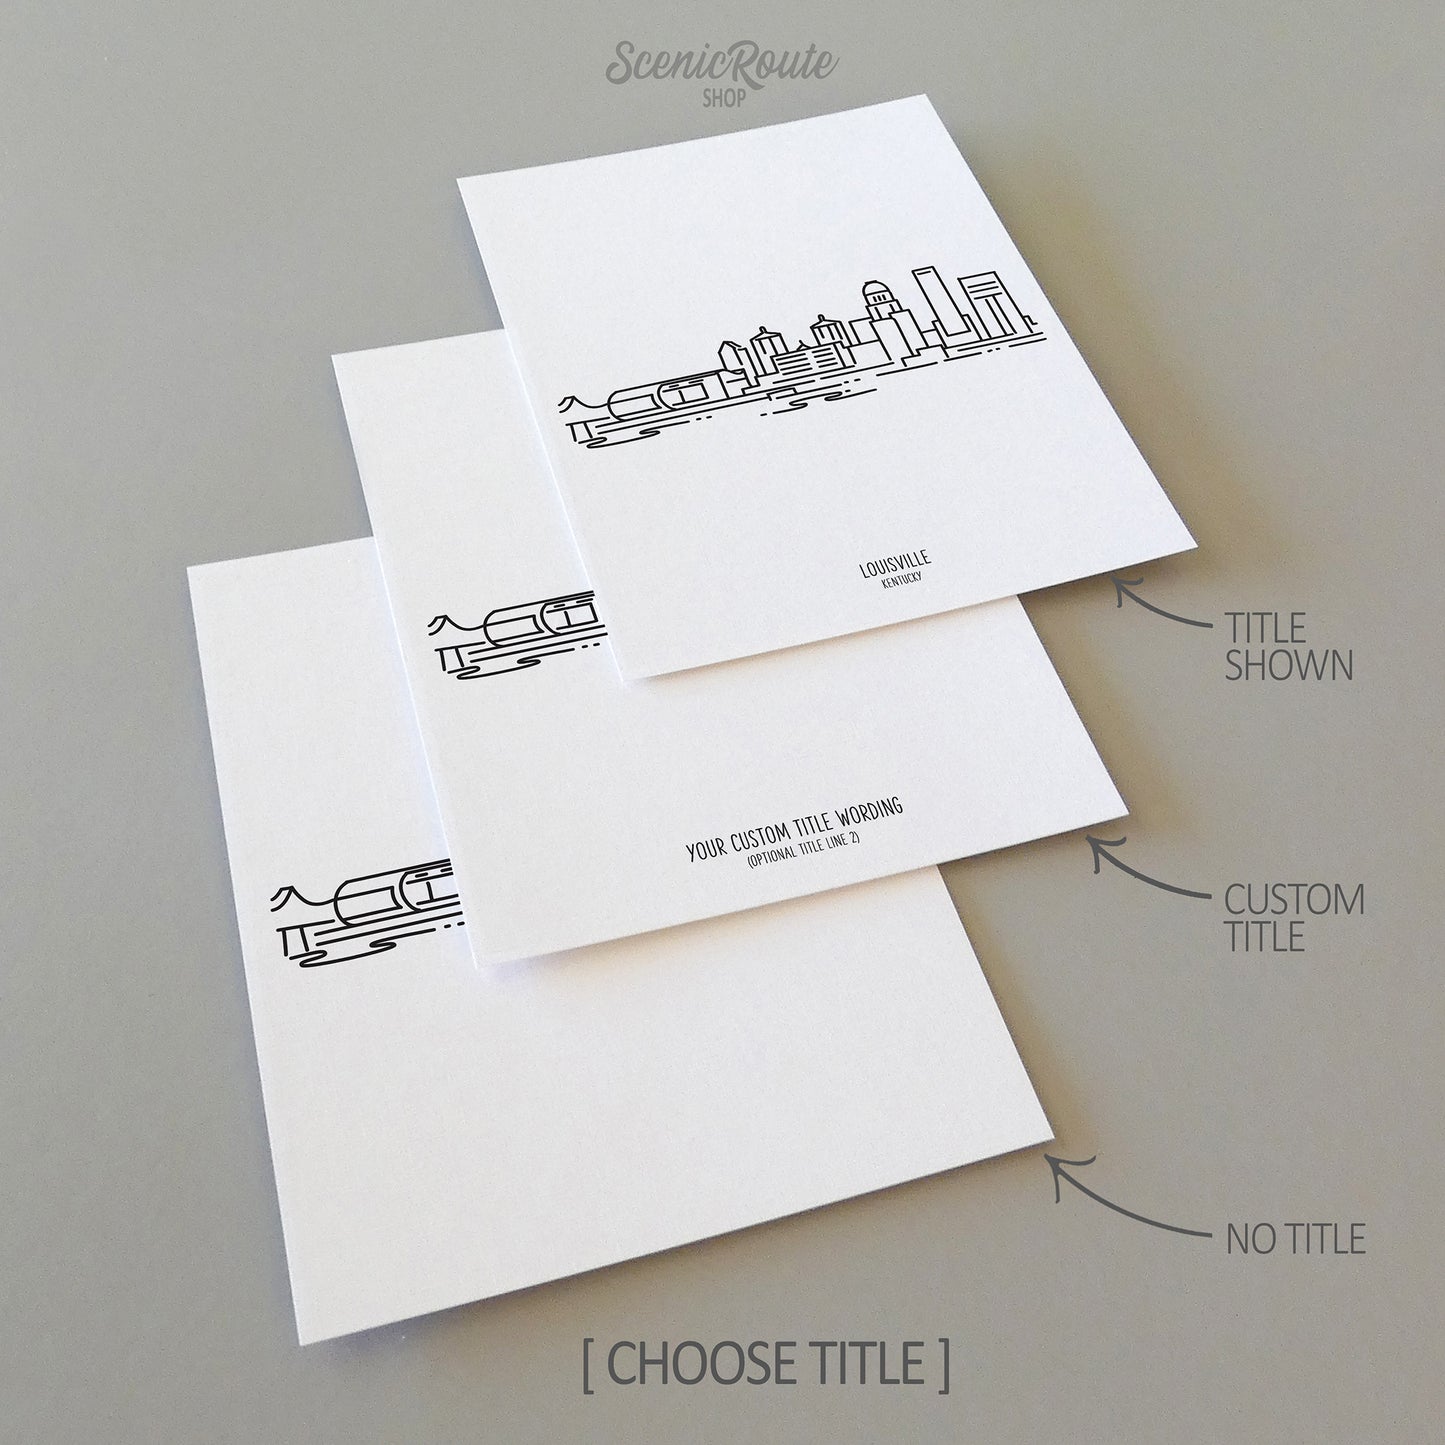 Three line art drawings of the Louisville Kentucky Skyline on white linen paper with a gray background. The pieces are shown with title options that can be chosen and personalized.